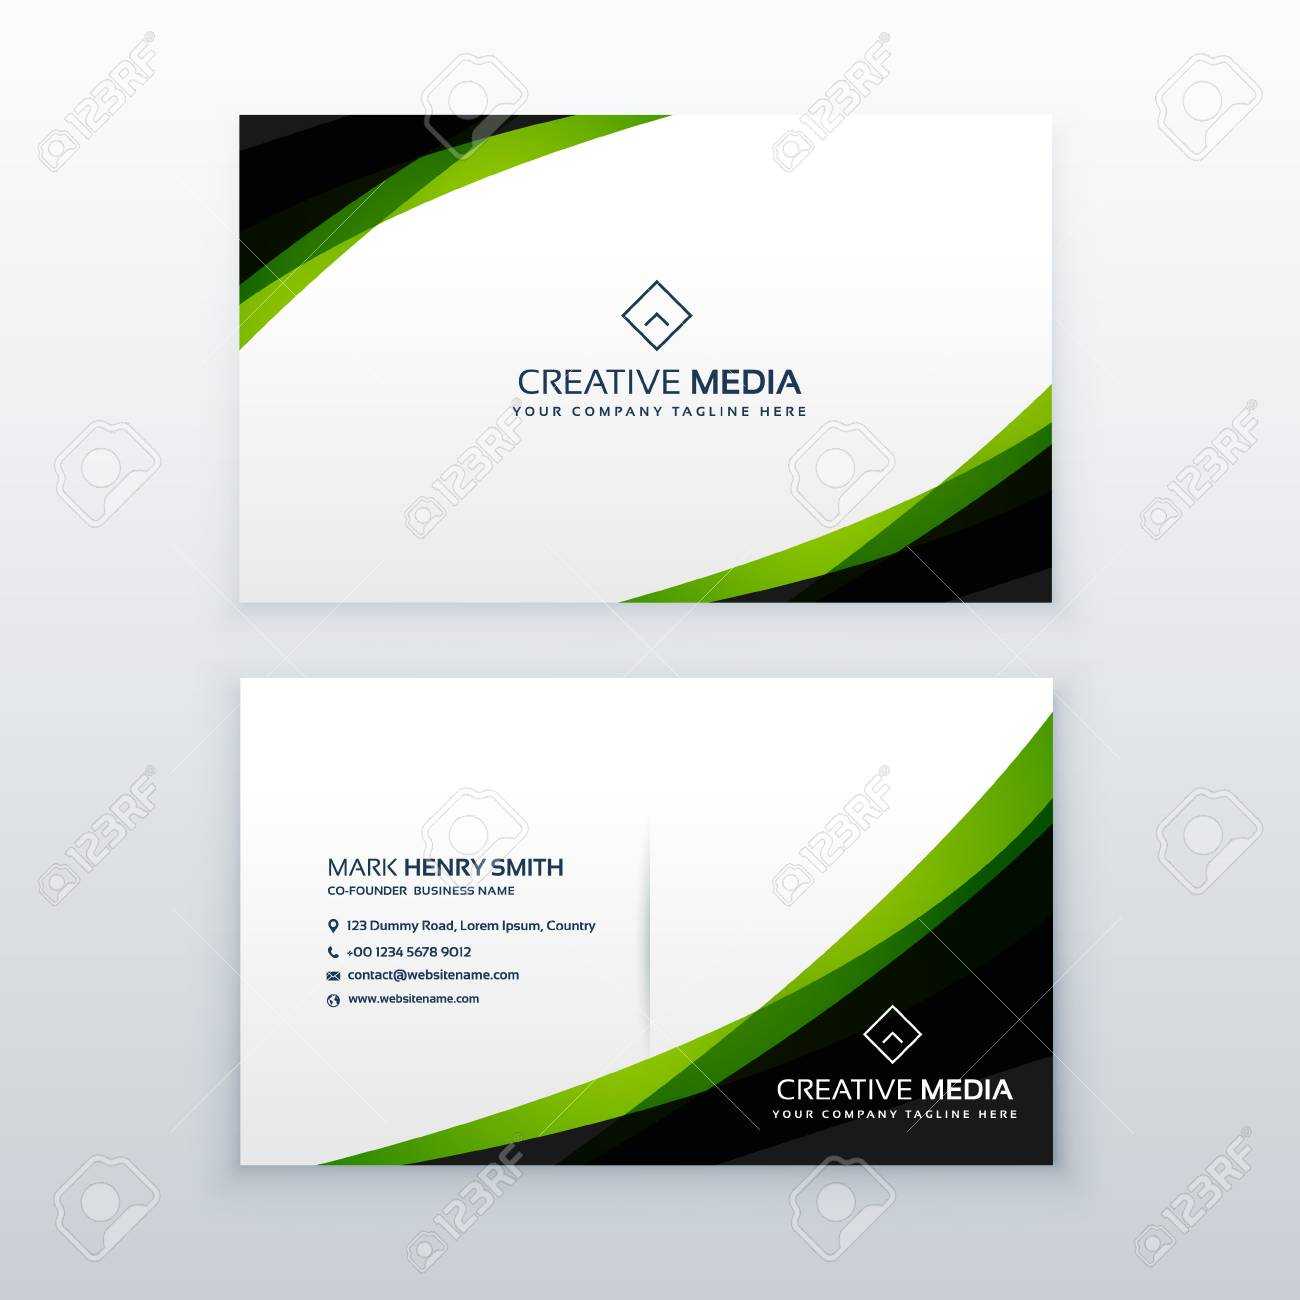 Clean Simple Green Business Card Design Template Throughout Template For Calling Card